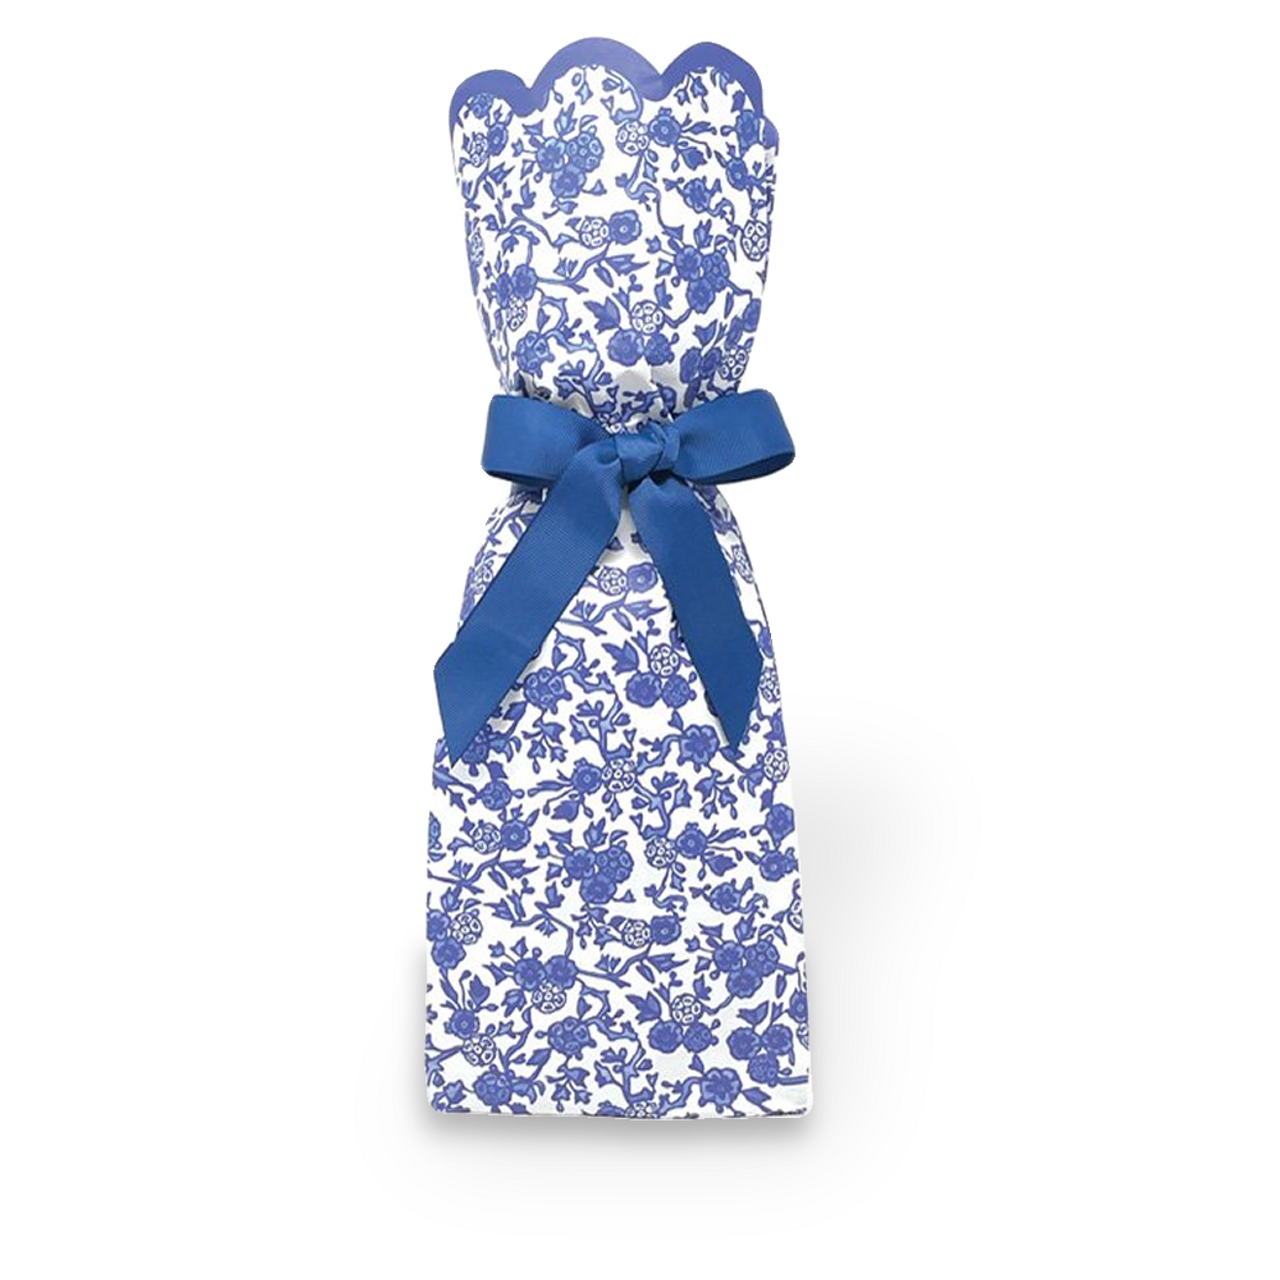 Lucy Grymes Paper Bottle Bags, Chinoiserie - Pack of 6